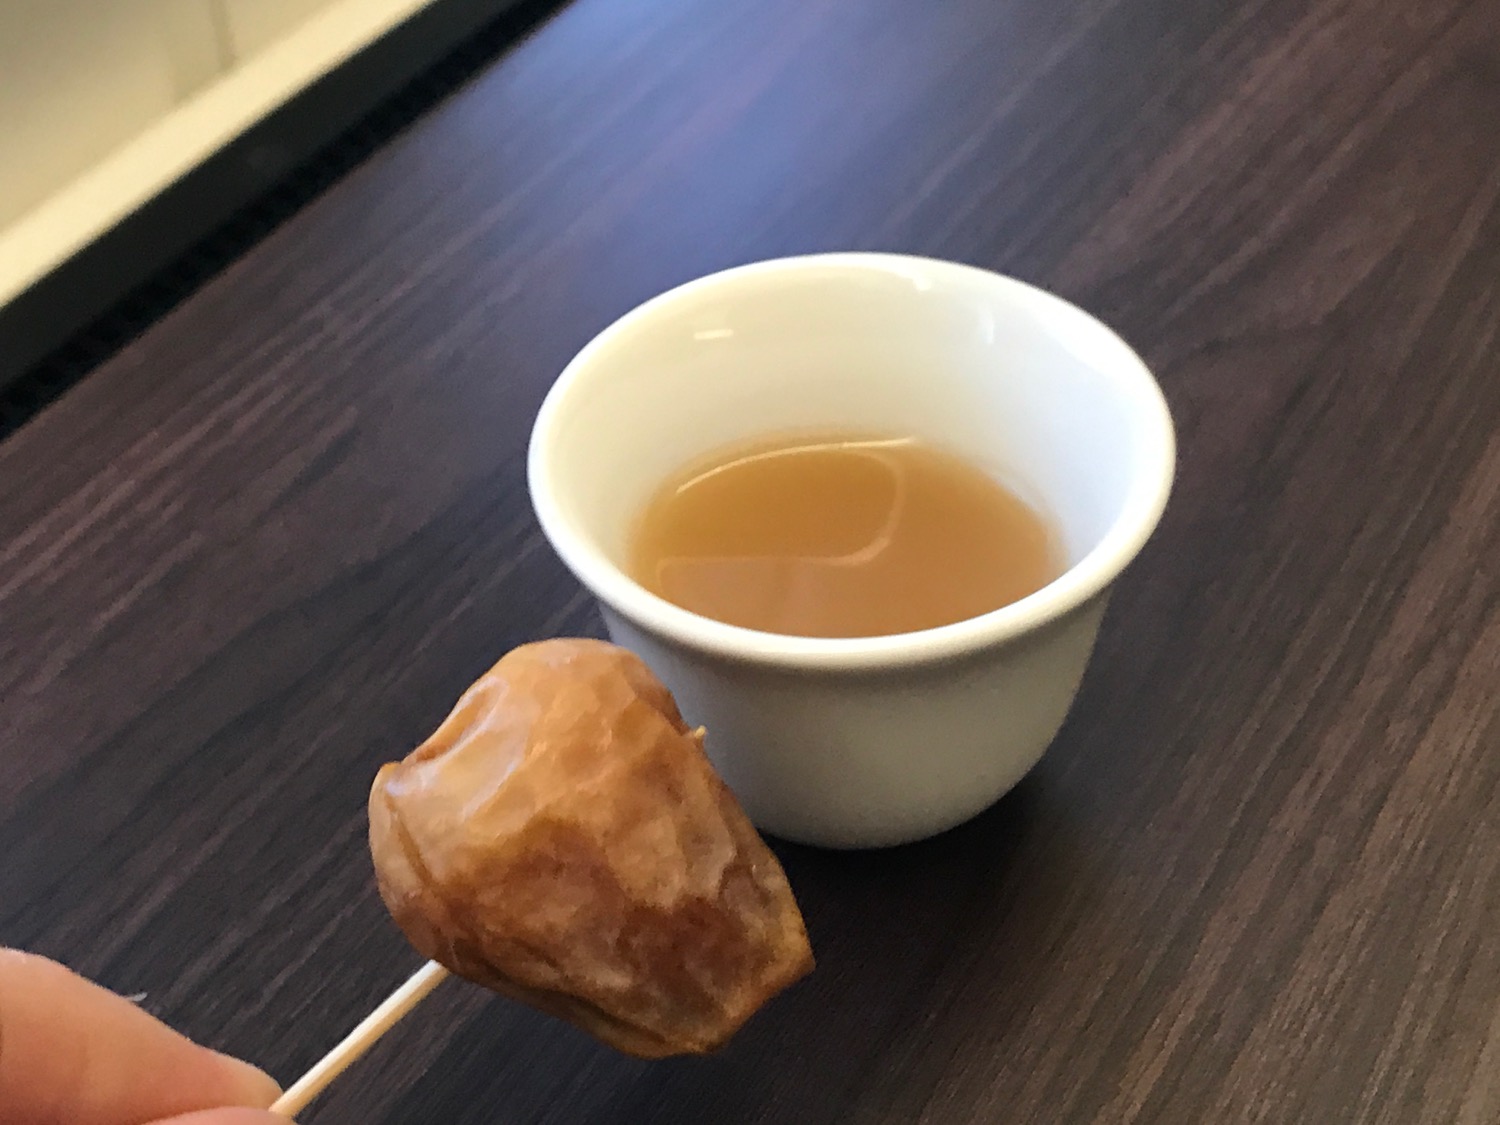 a hand holding a stick with a piece of food on a stick next to a cup of liquid